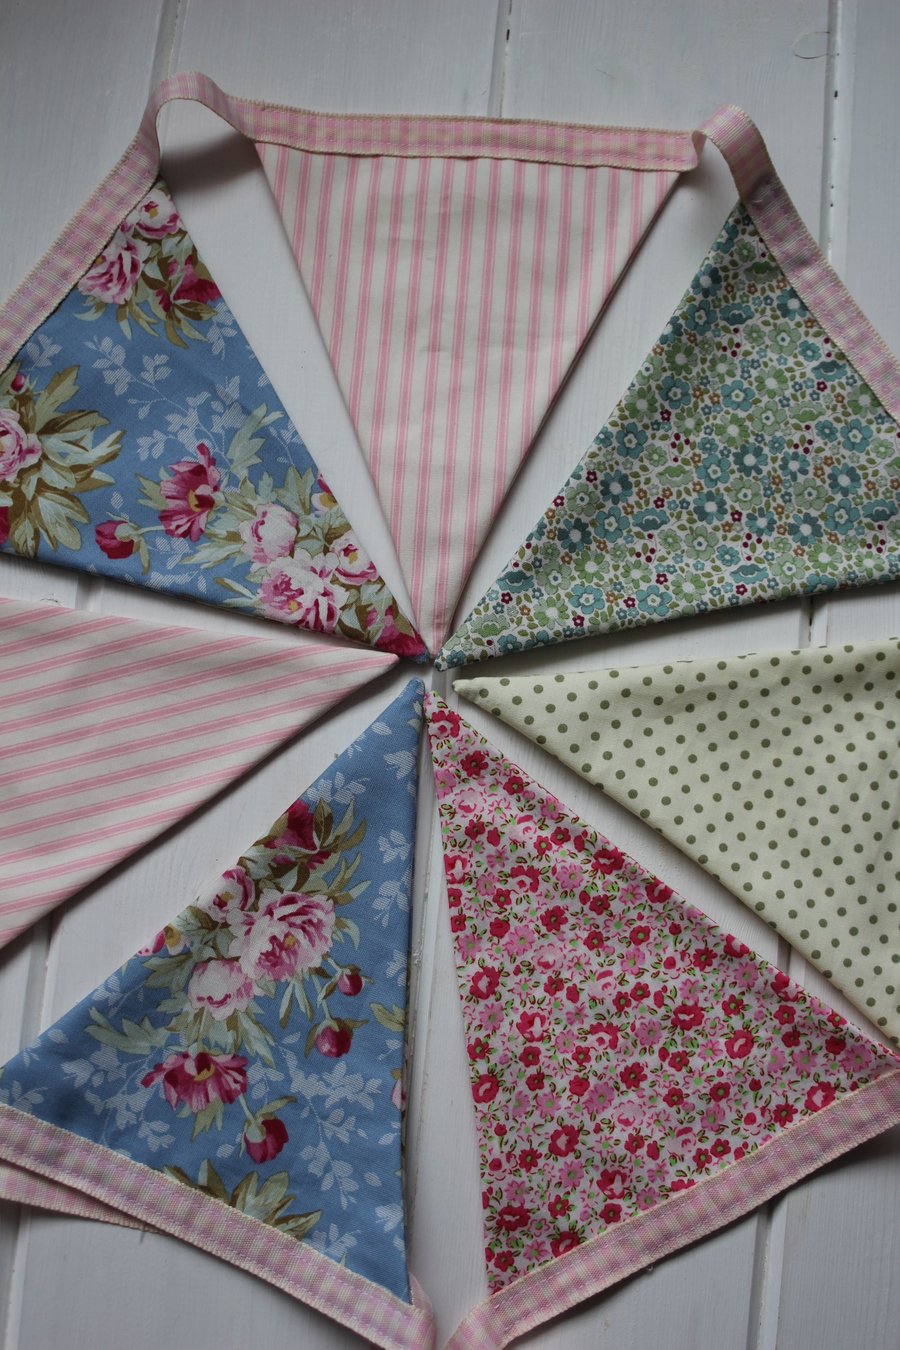 Summery bunting - 3 metres in floral, polka dot and stripy cotton fabrics